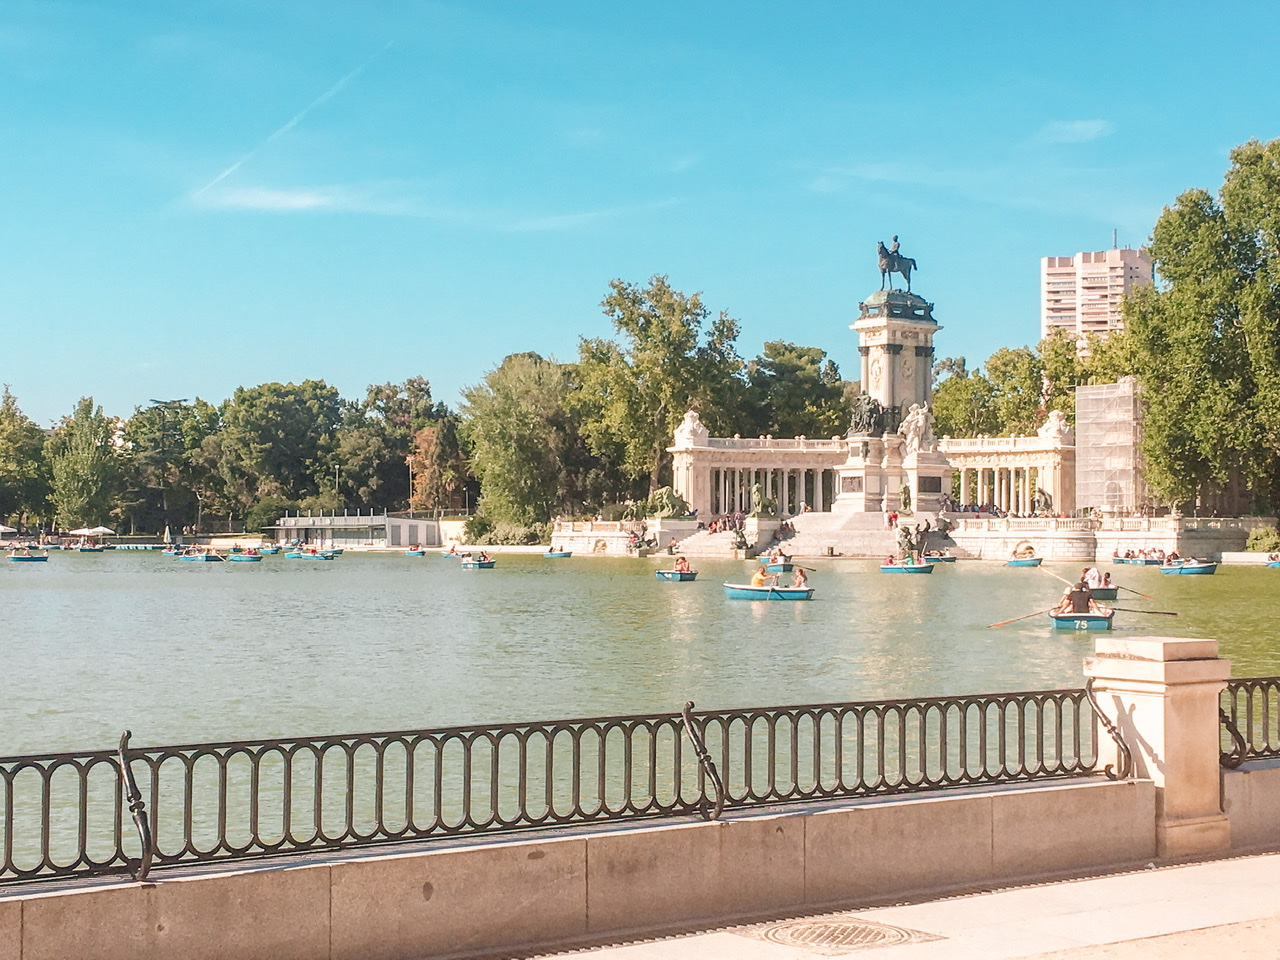 numberous blue boats with people rowing on blue lake in front of statue and monument on a Sunny day at Retiro Park in Madrid